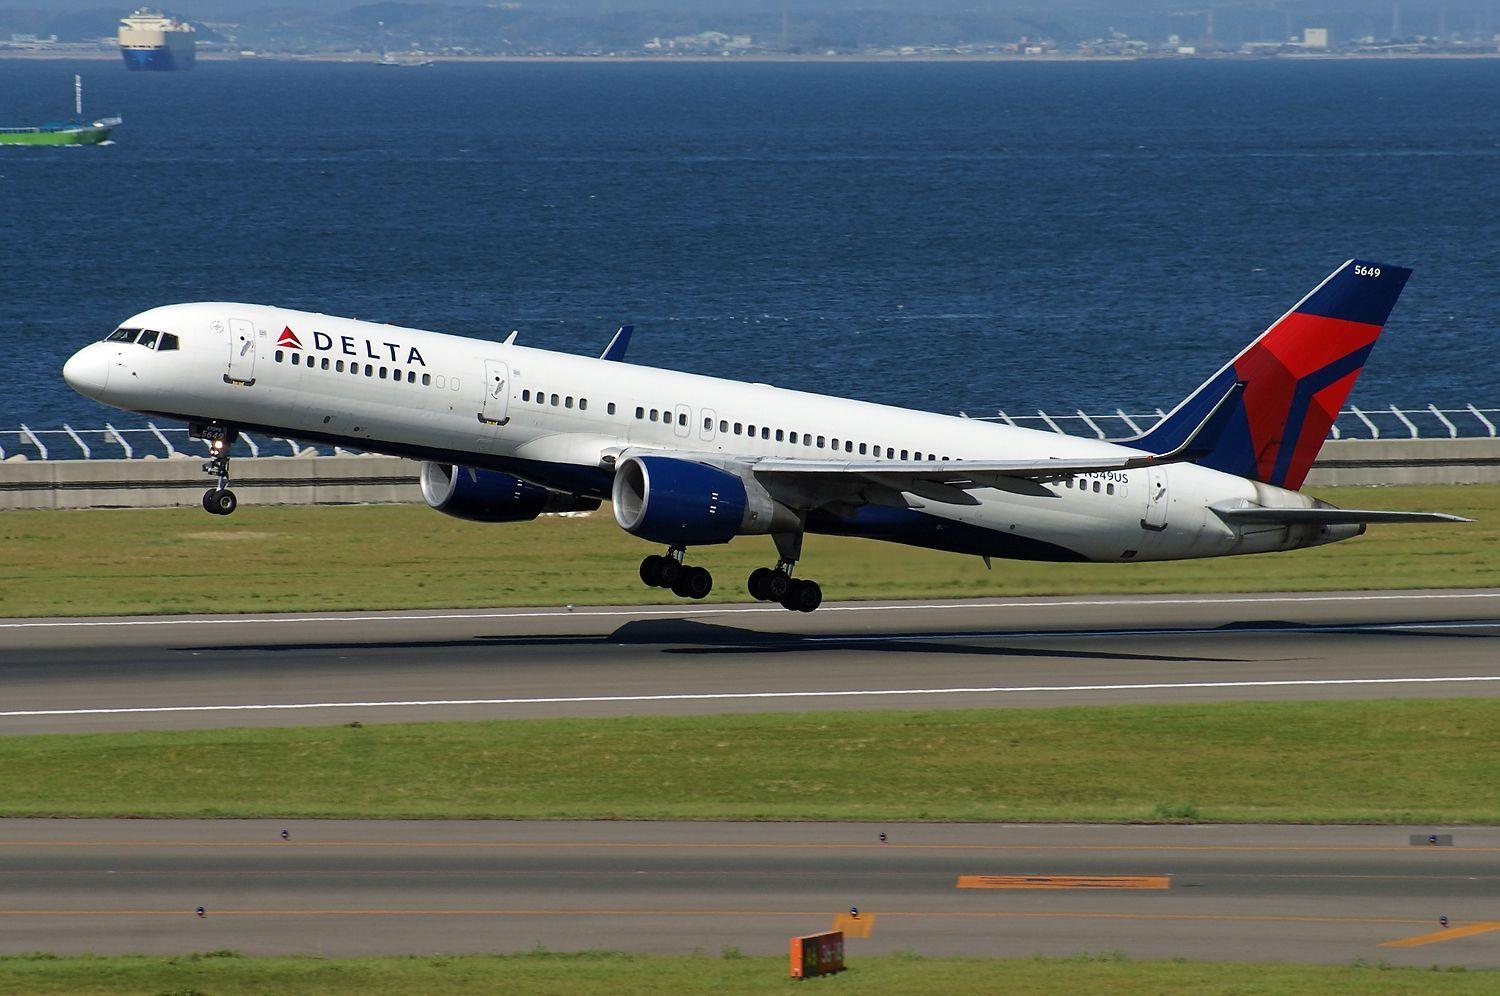 Boeing Is No Longer The Only Player To Replace Delta's Aging 757s